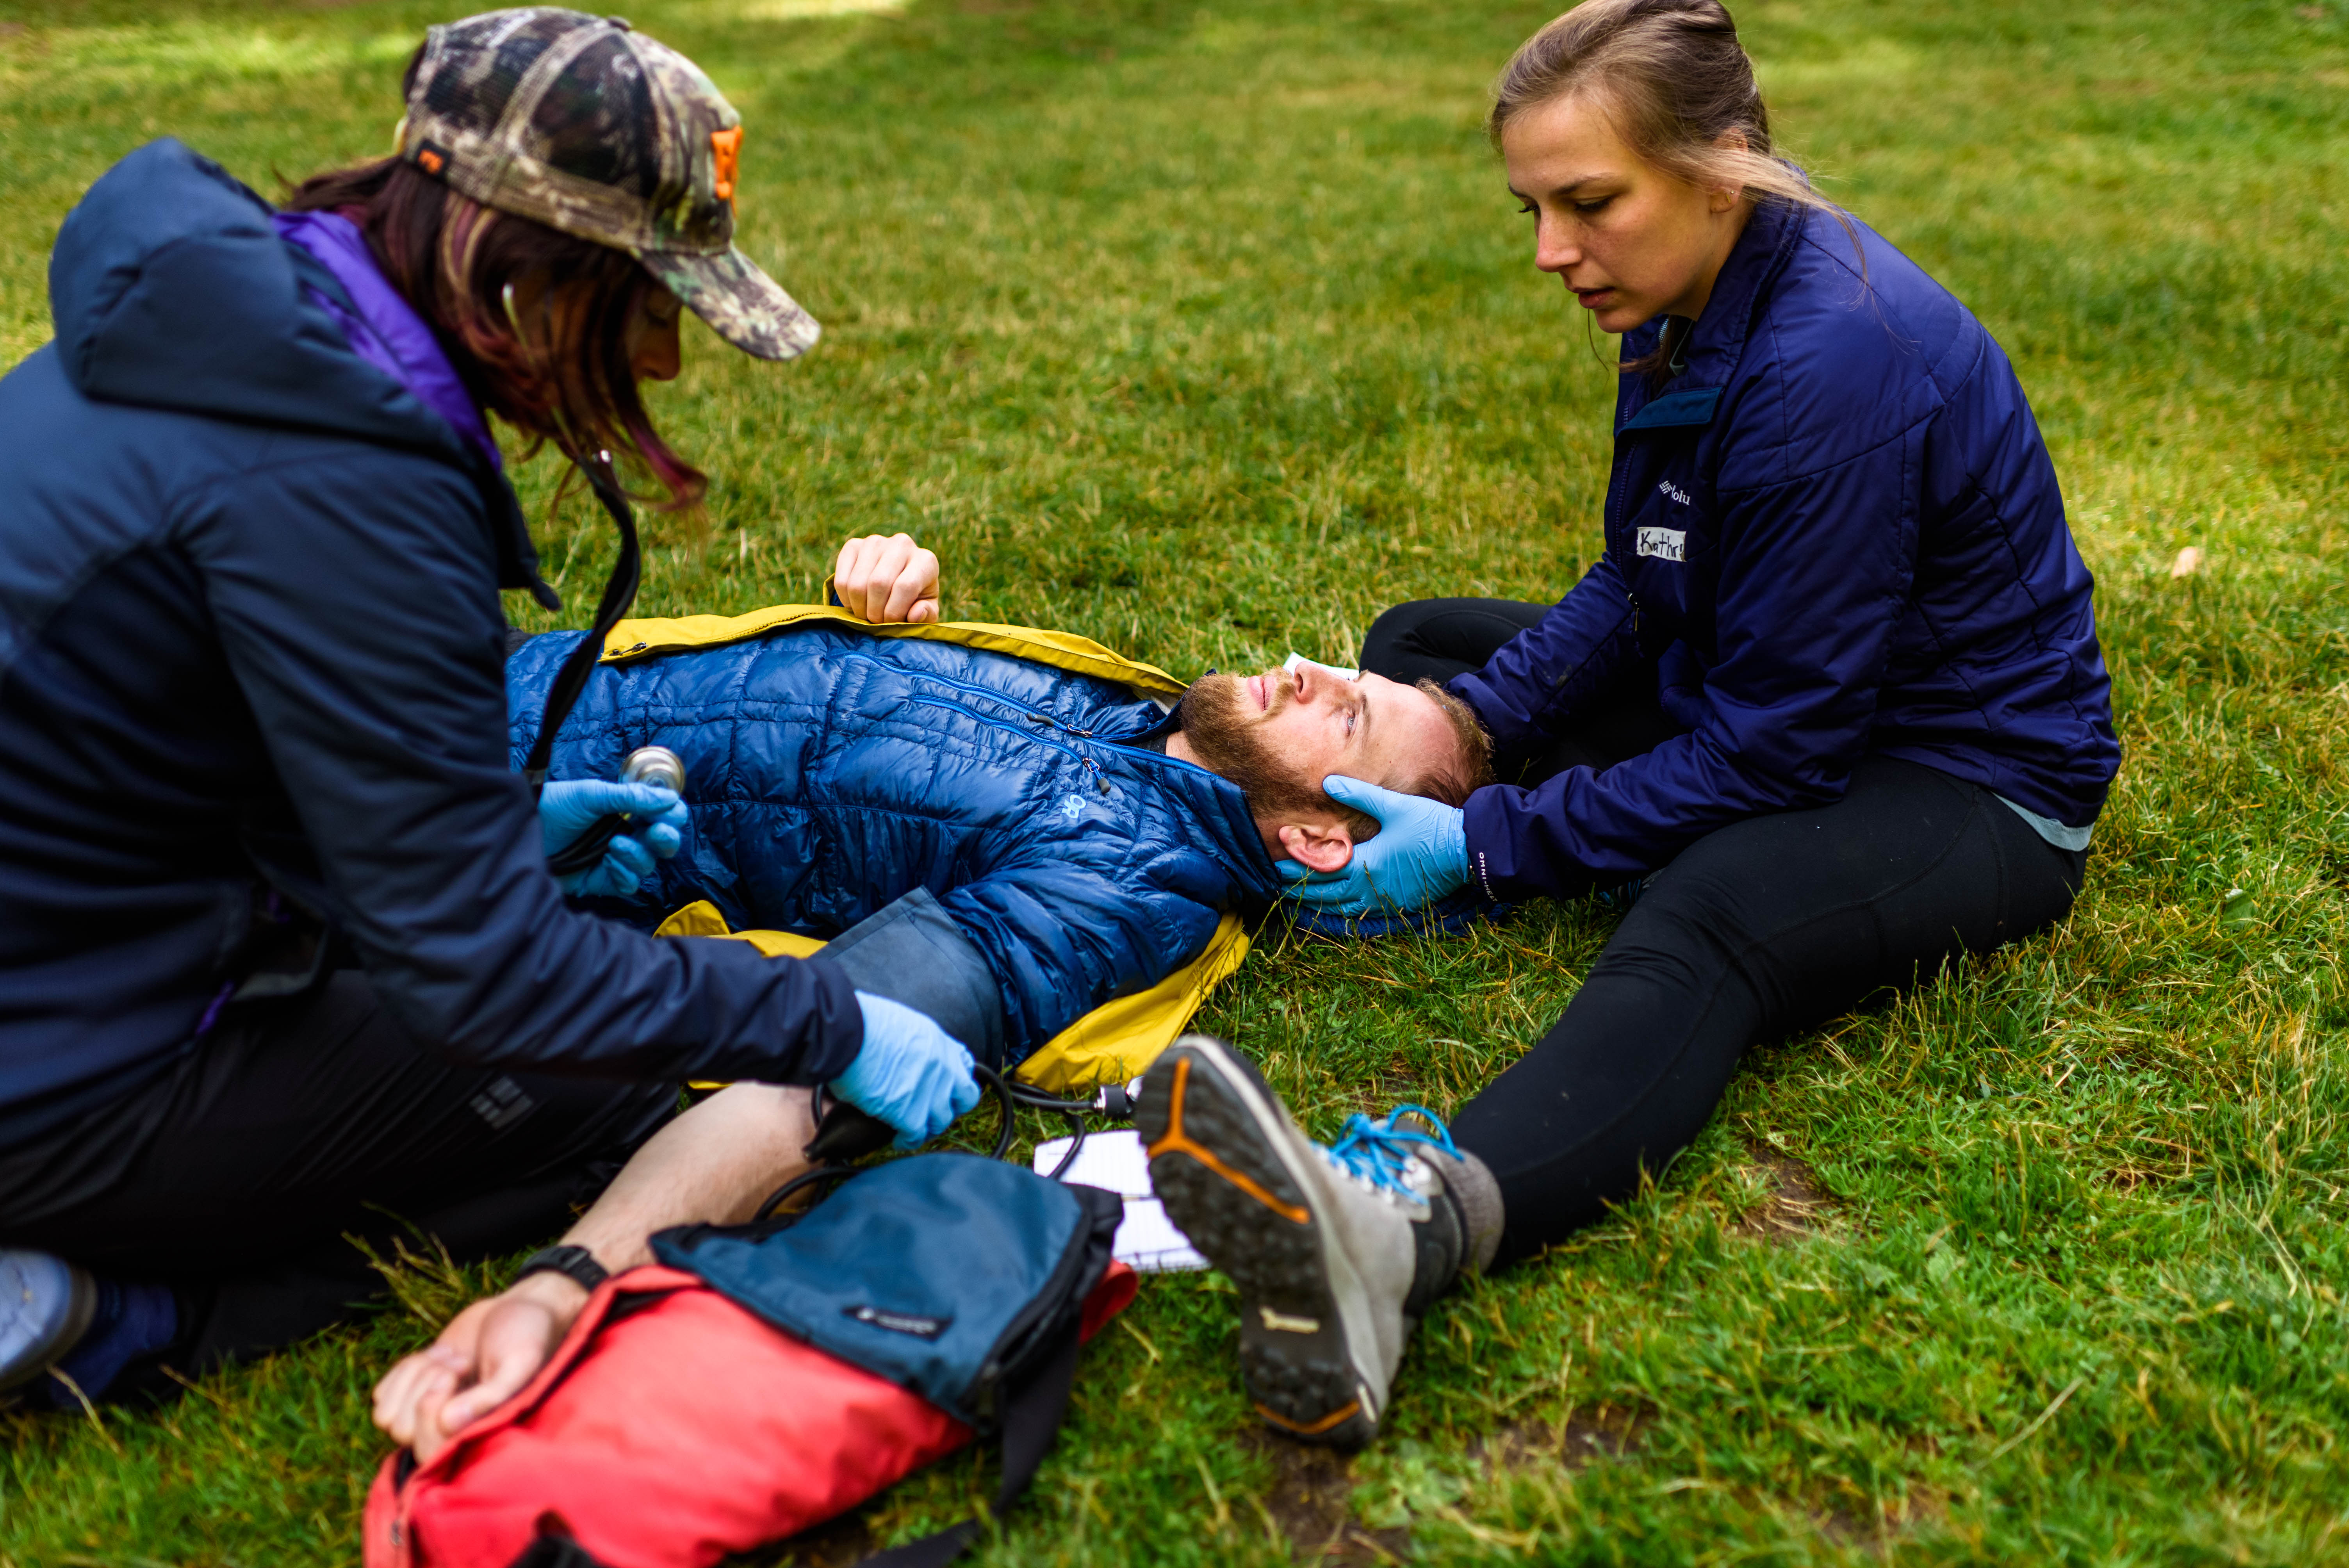 Two class participants examine and check the blood pressure of a male participant on the ground